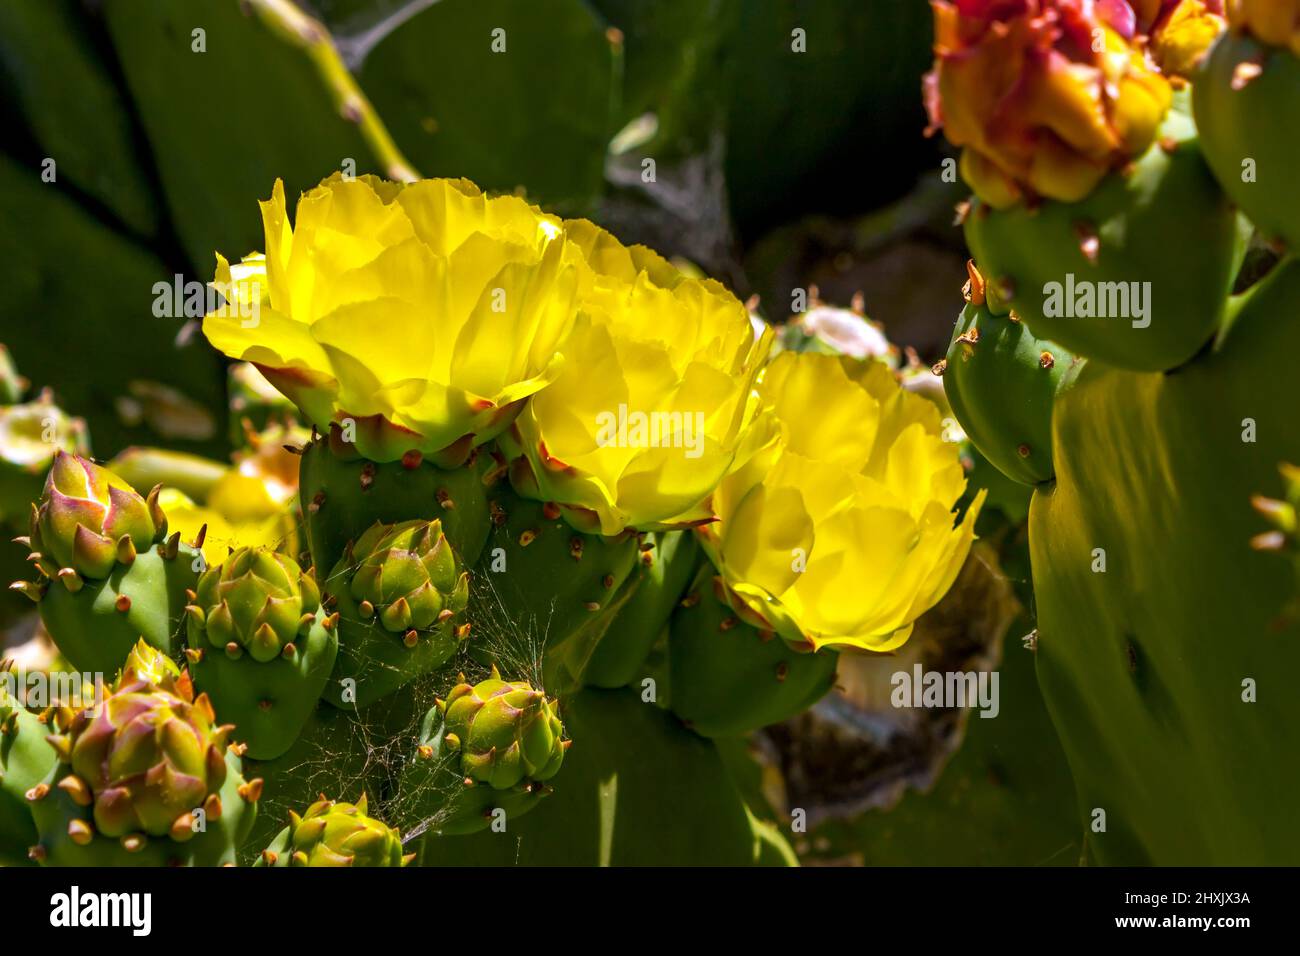 Cactus in bloom with yellow flowers, in Balboa park,California. Stock Photo